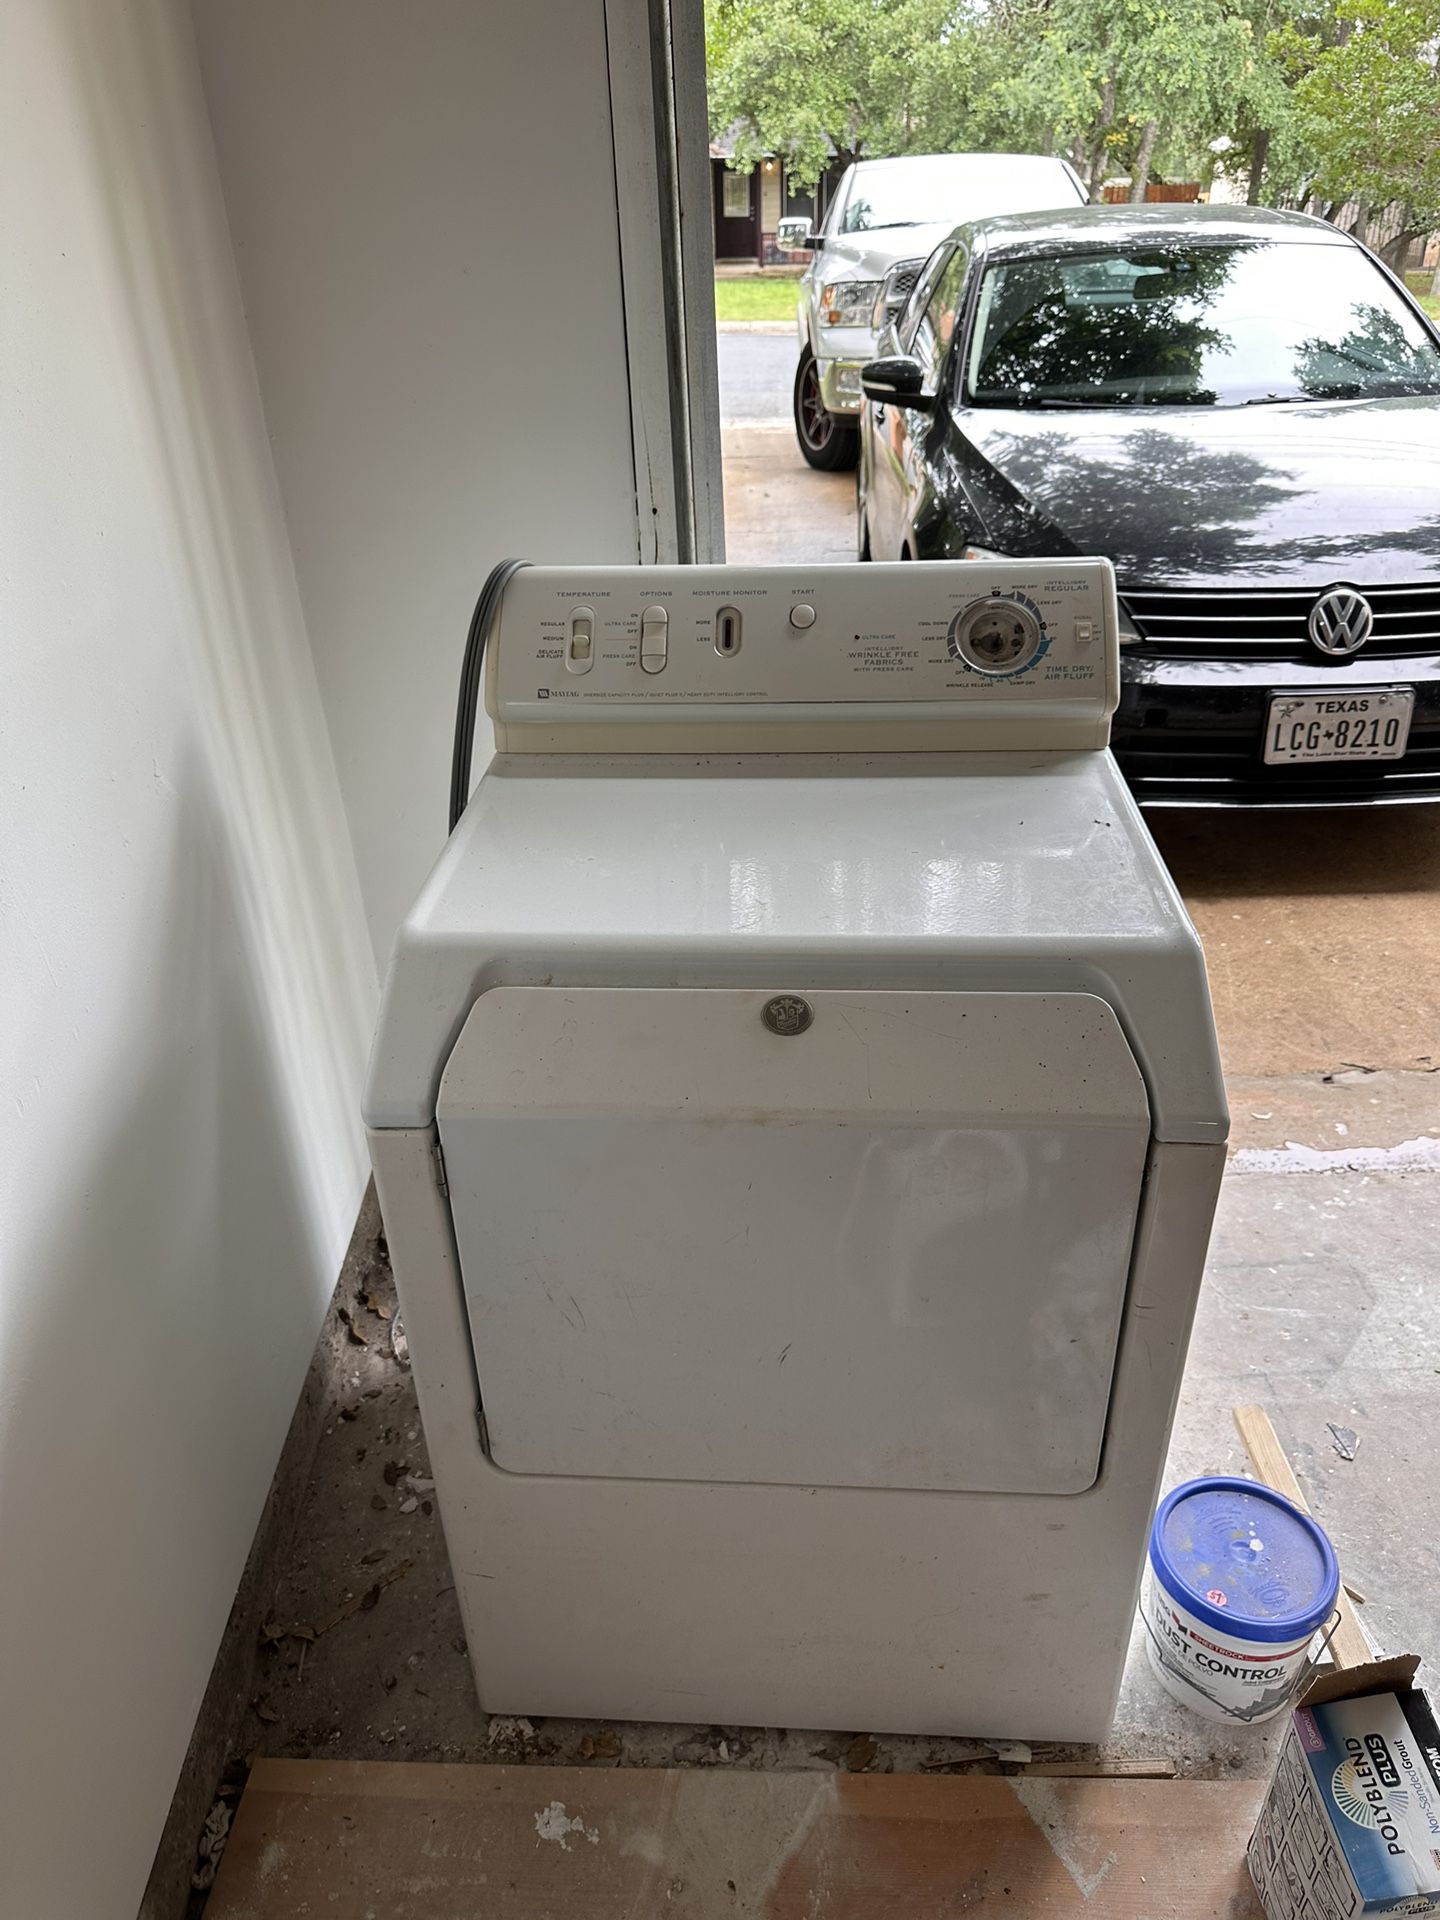 Working Electric Dryer